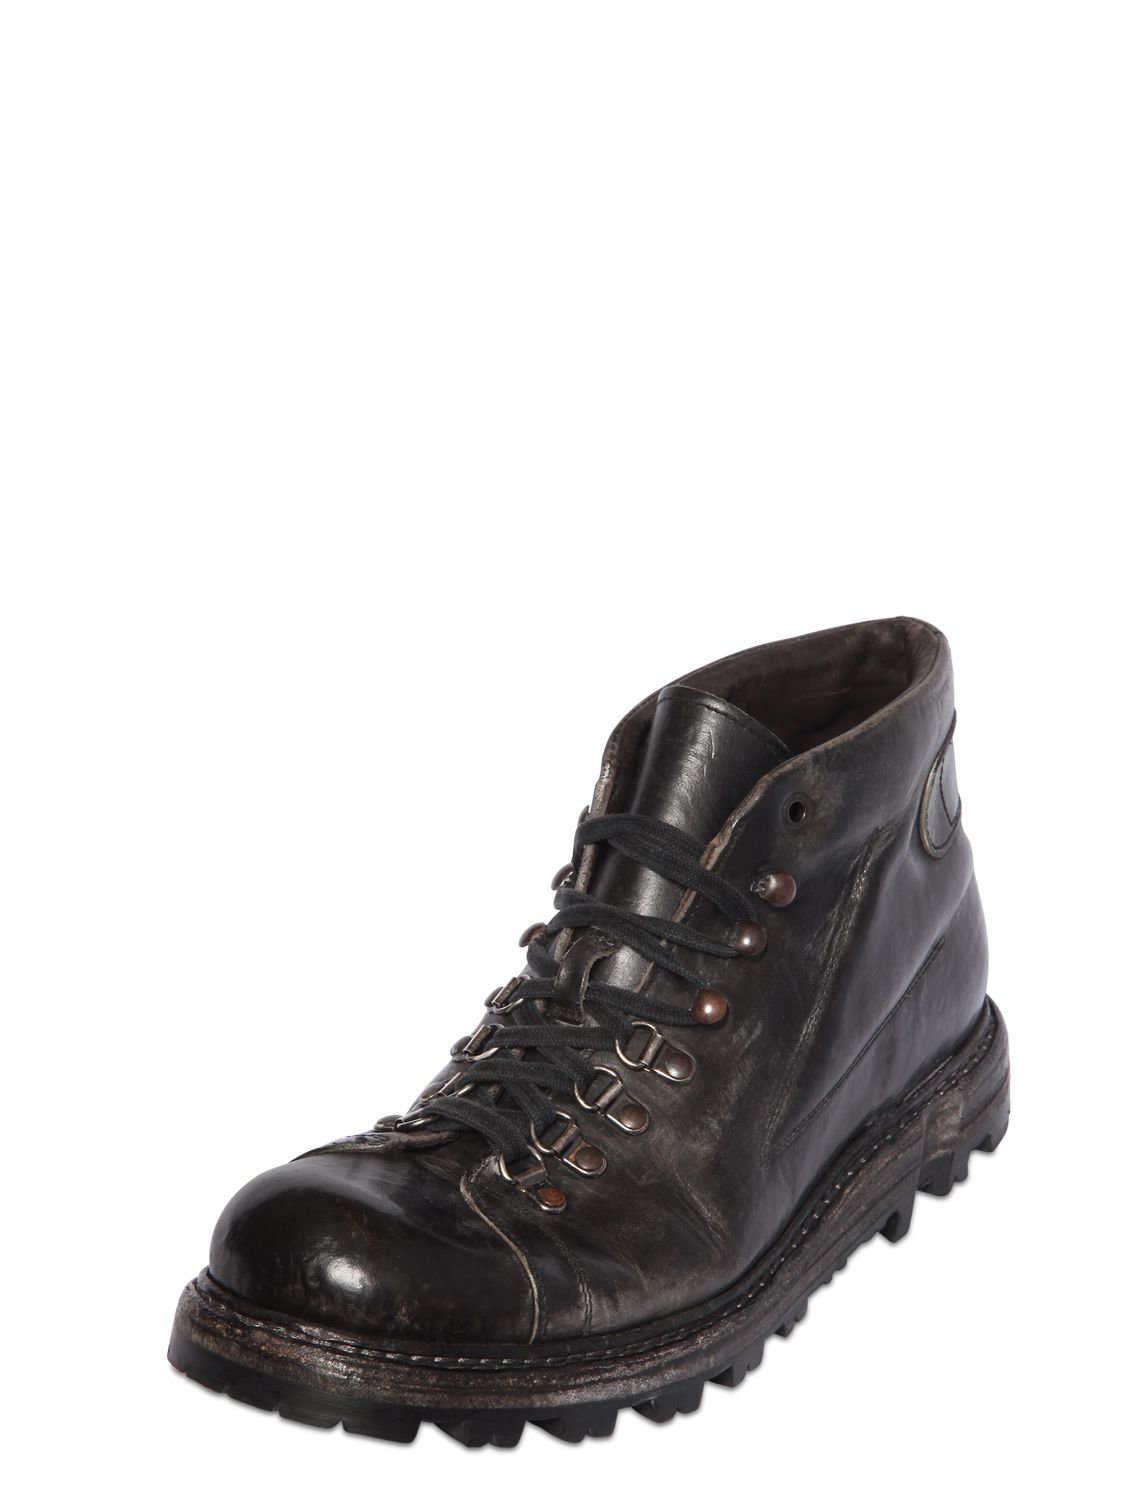 Lyst - Shoto Washed Leather Combat Boots in Black for Men